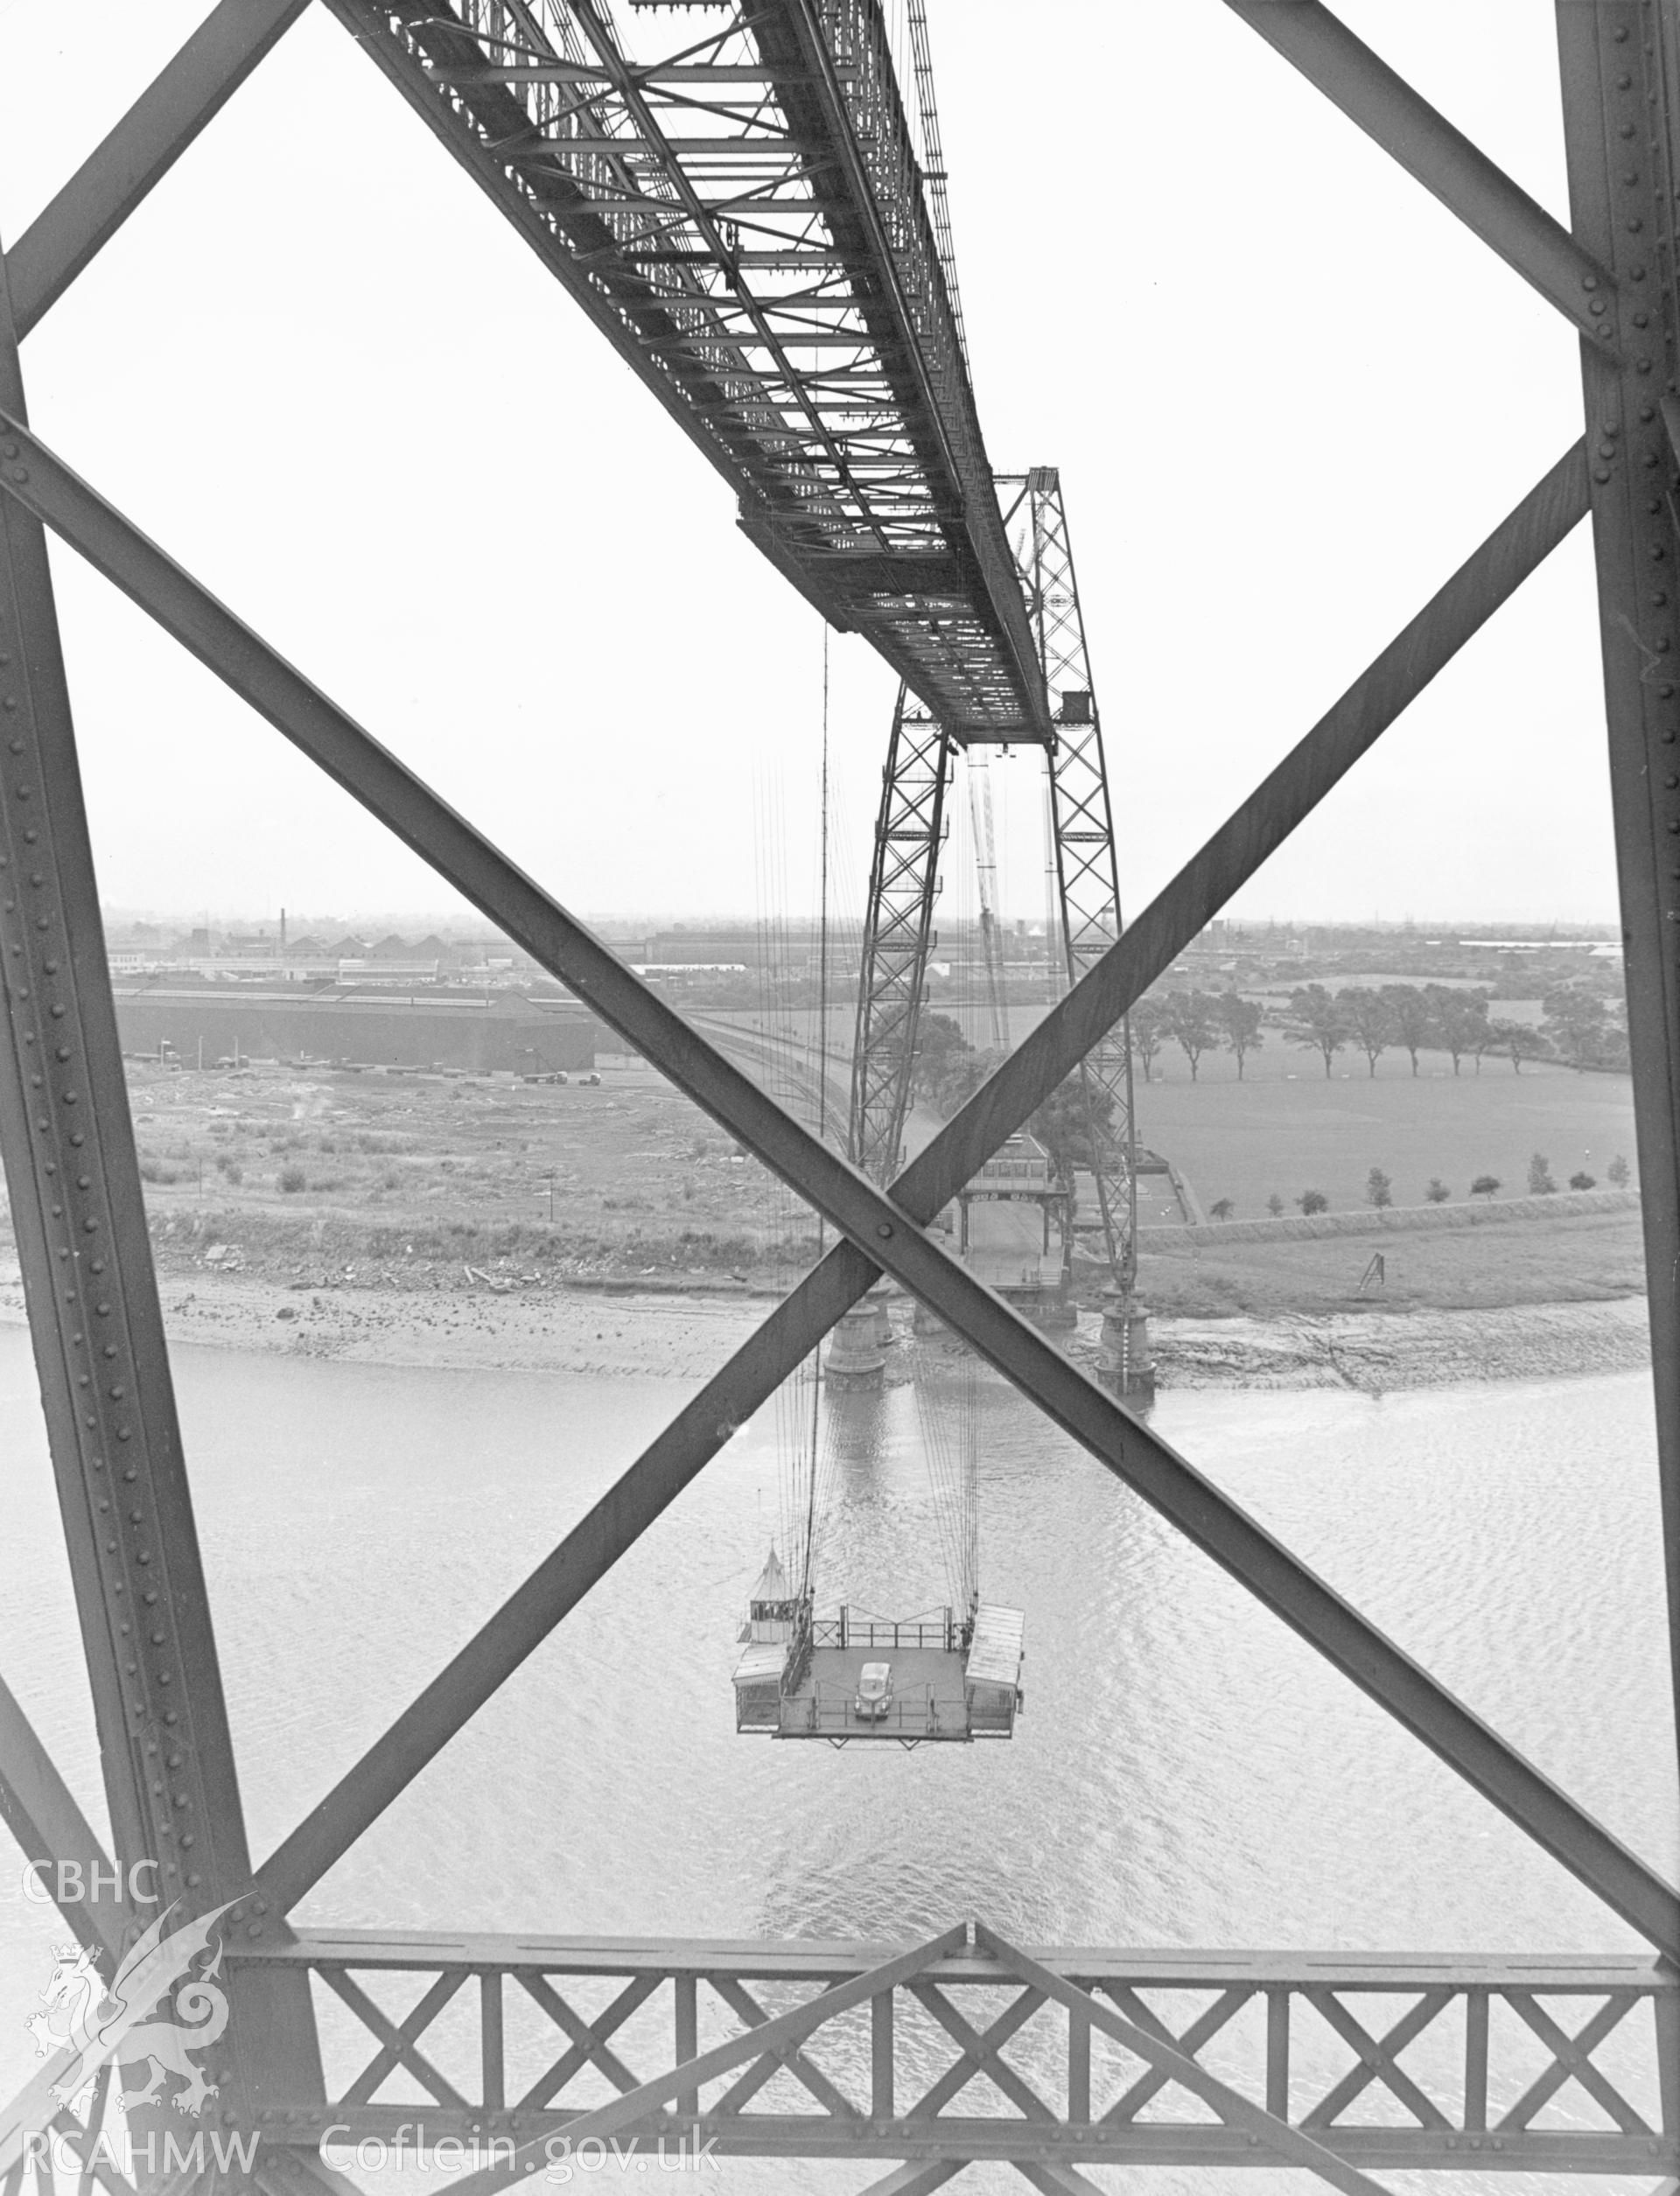 1 b/w print showing view of Newport Transporter bridge in operation, collated by the former Central Office of Information.